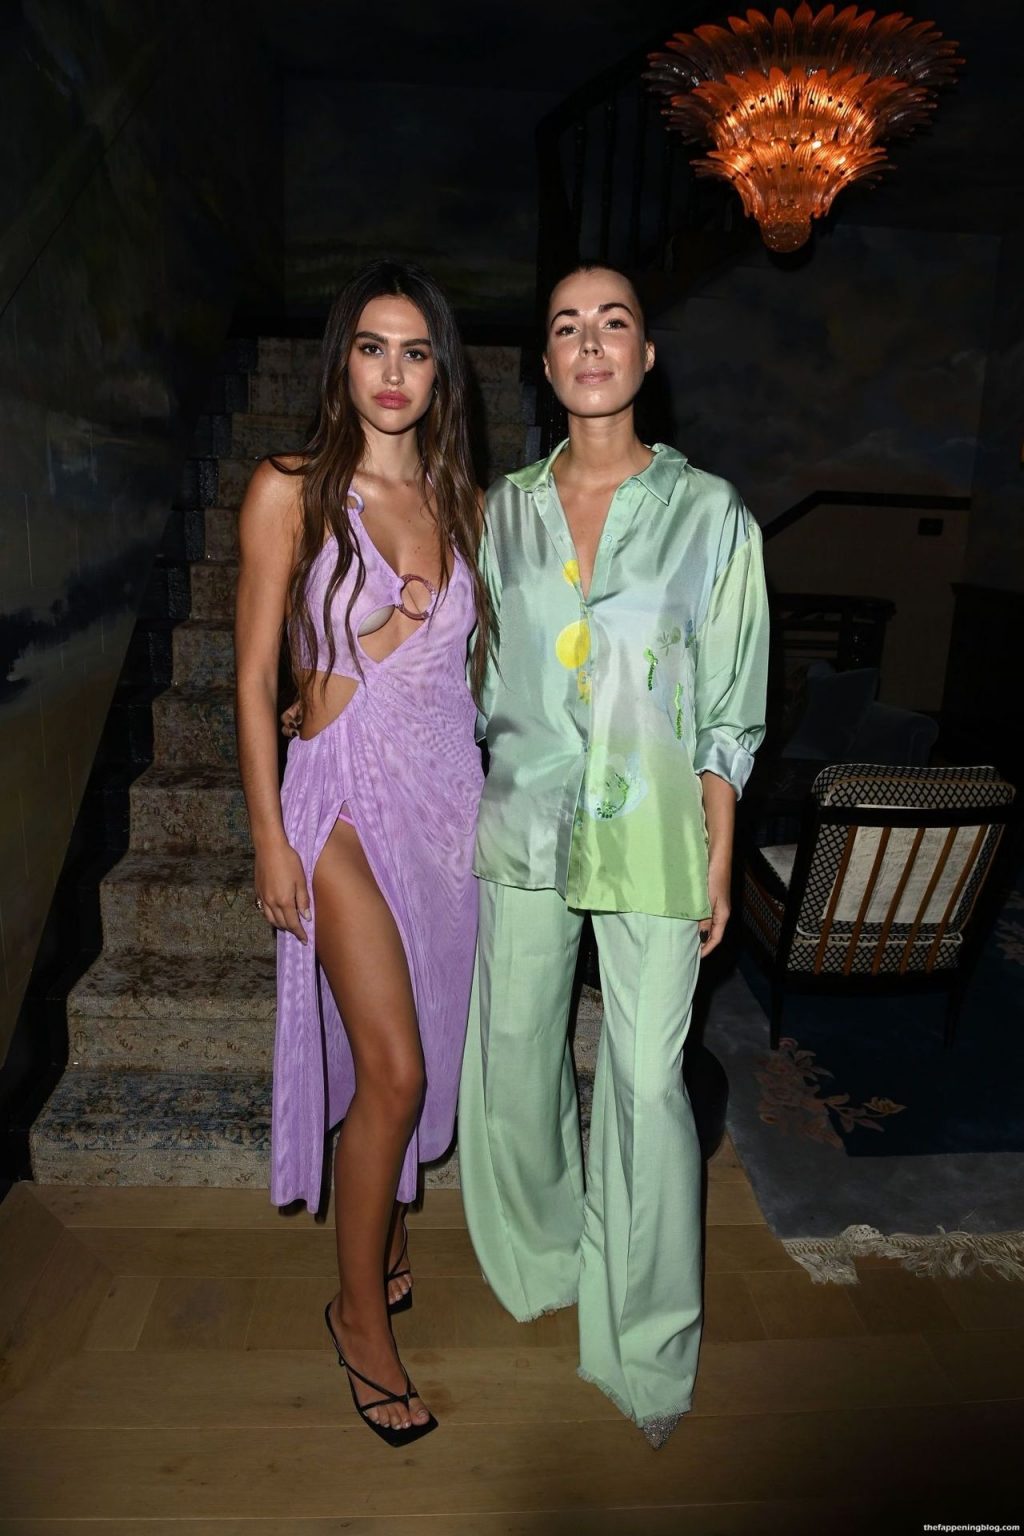 Amelia Hamlin Puts on a Racy Display in a Sexy Dress at the Opening Night of LFW (9 Photos)